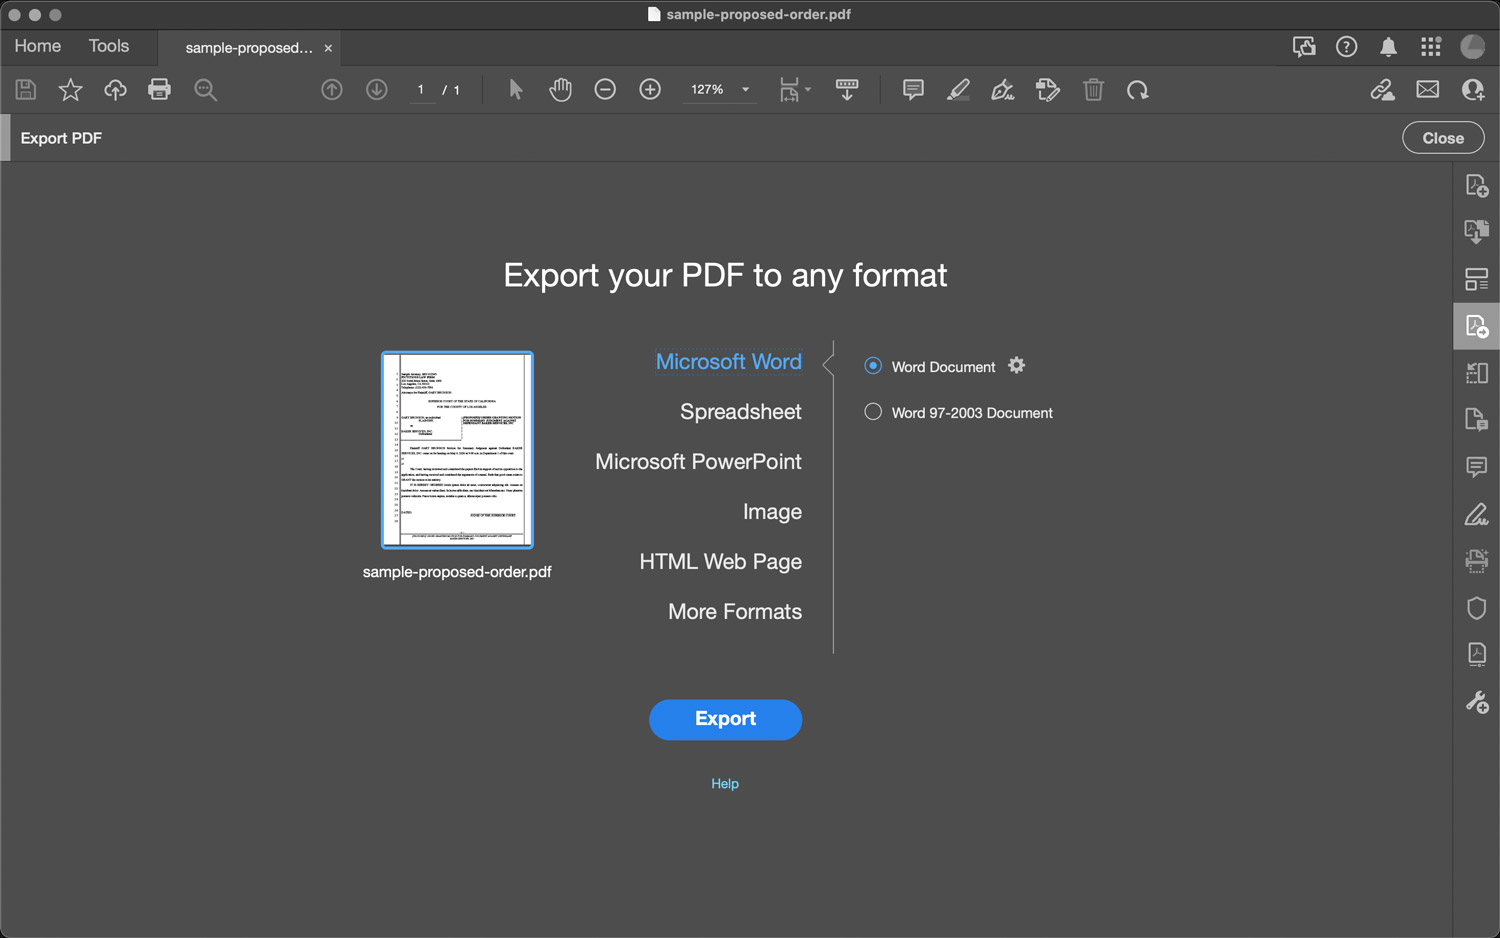 Export your PDF to any Format